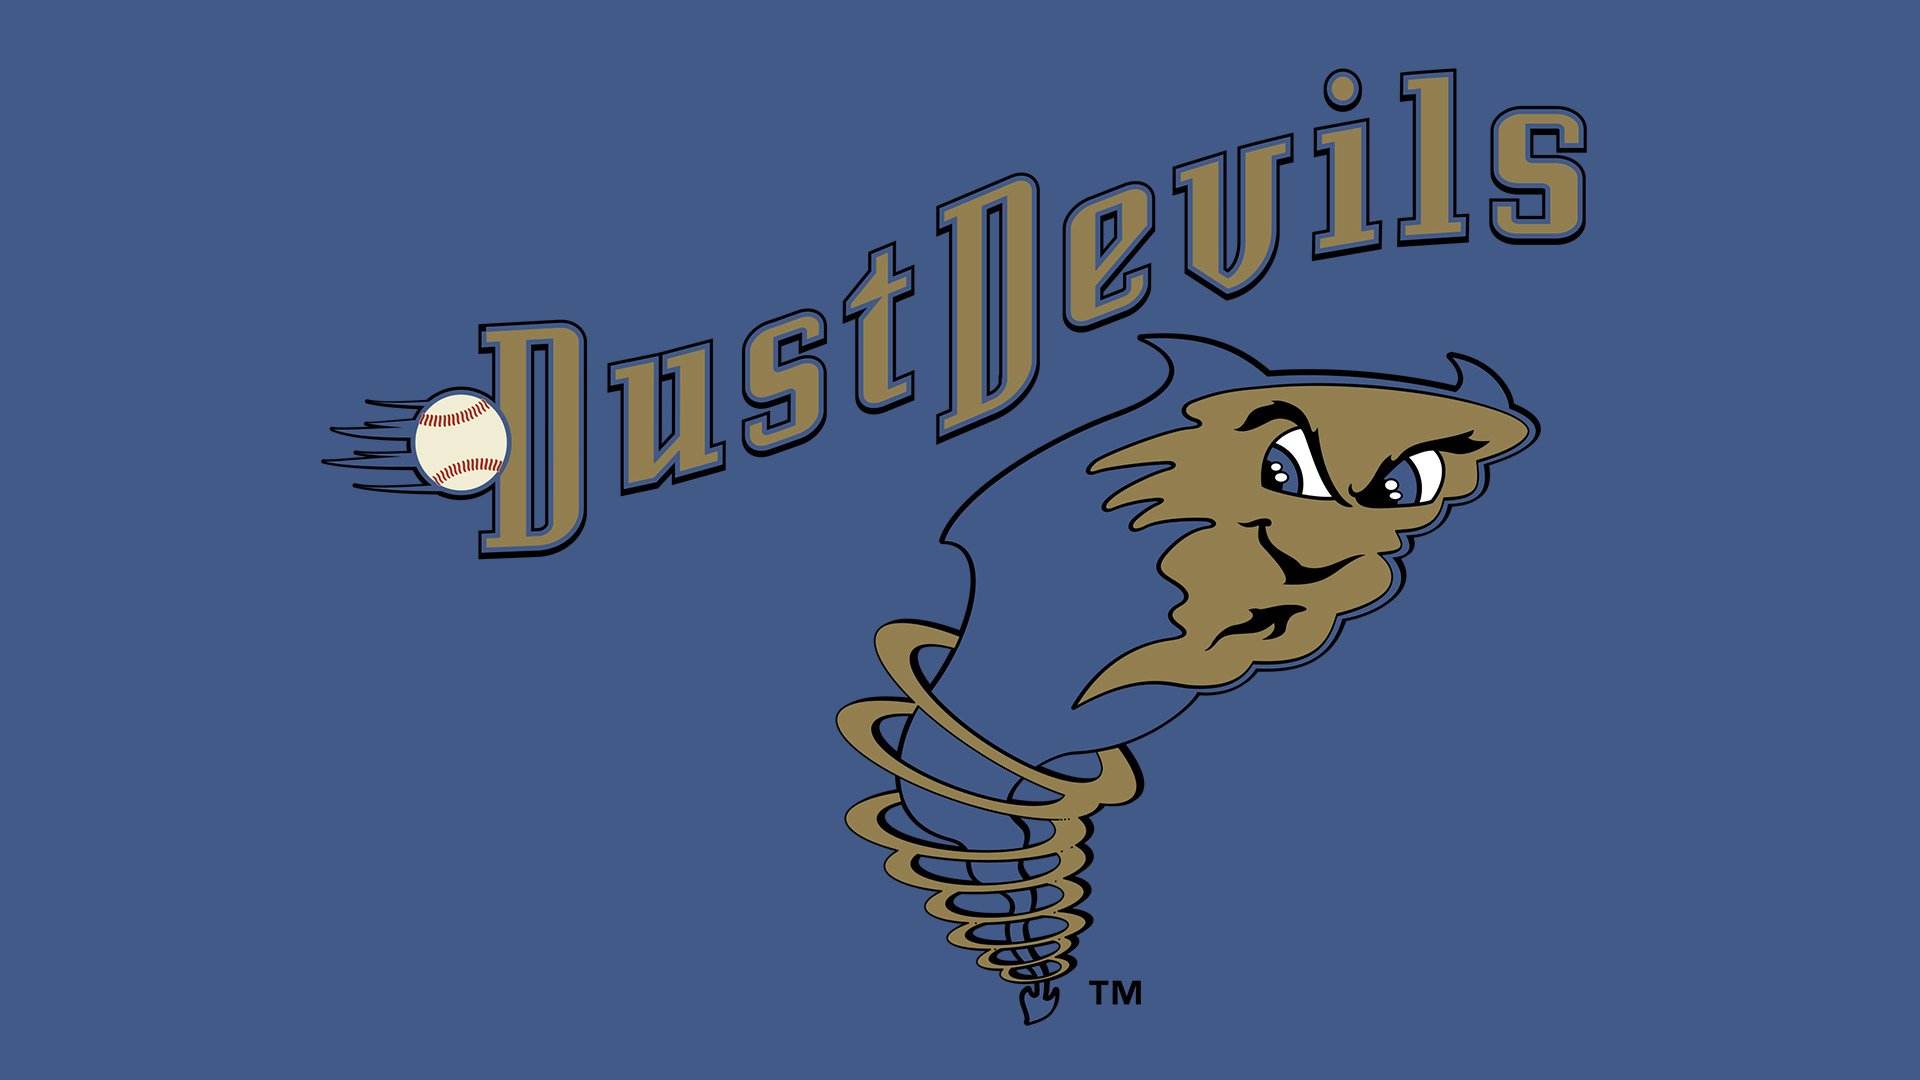 Meaning Tri-City Dust Devils logo and symbol | history and evolution1920 x 1080